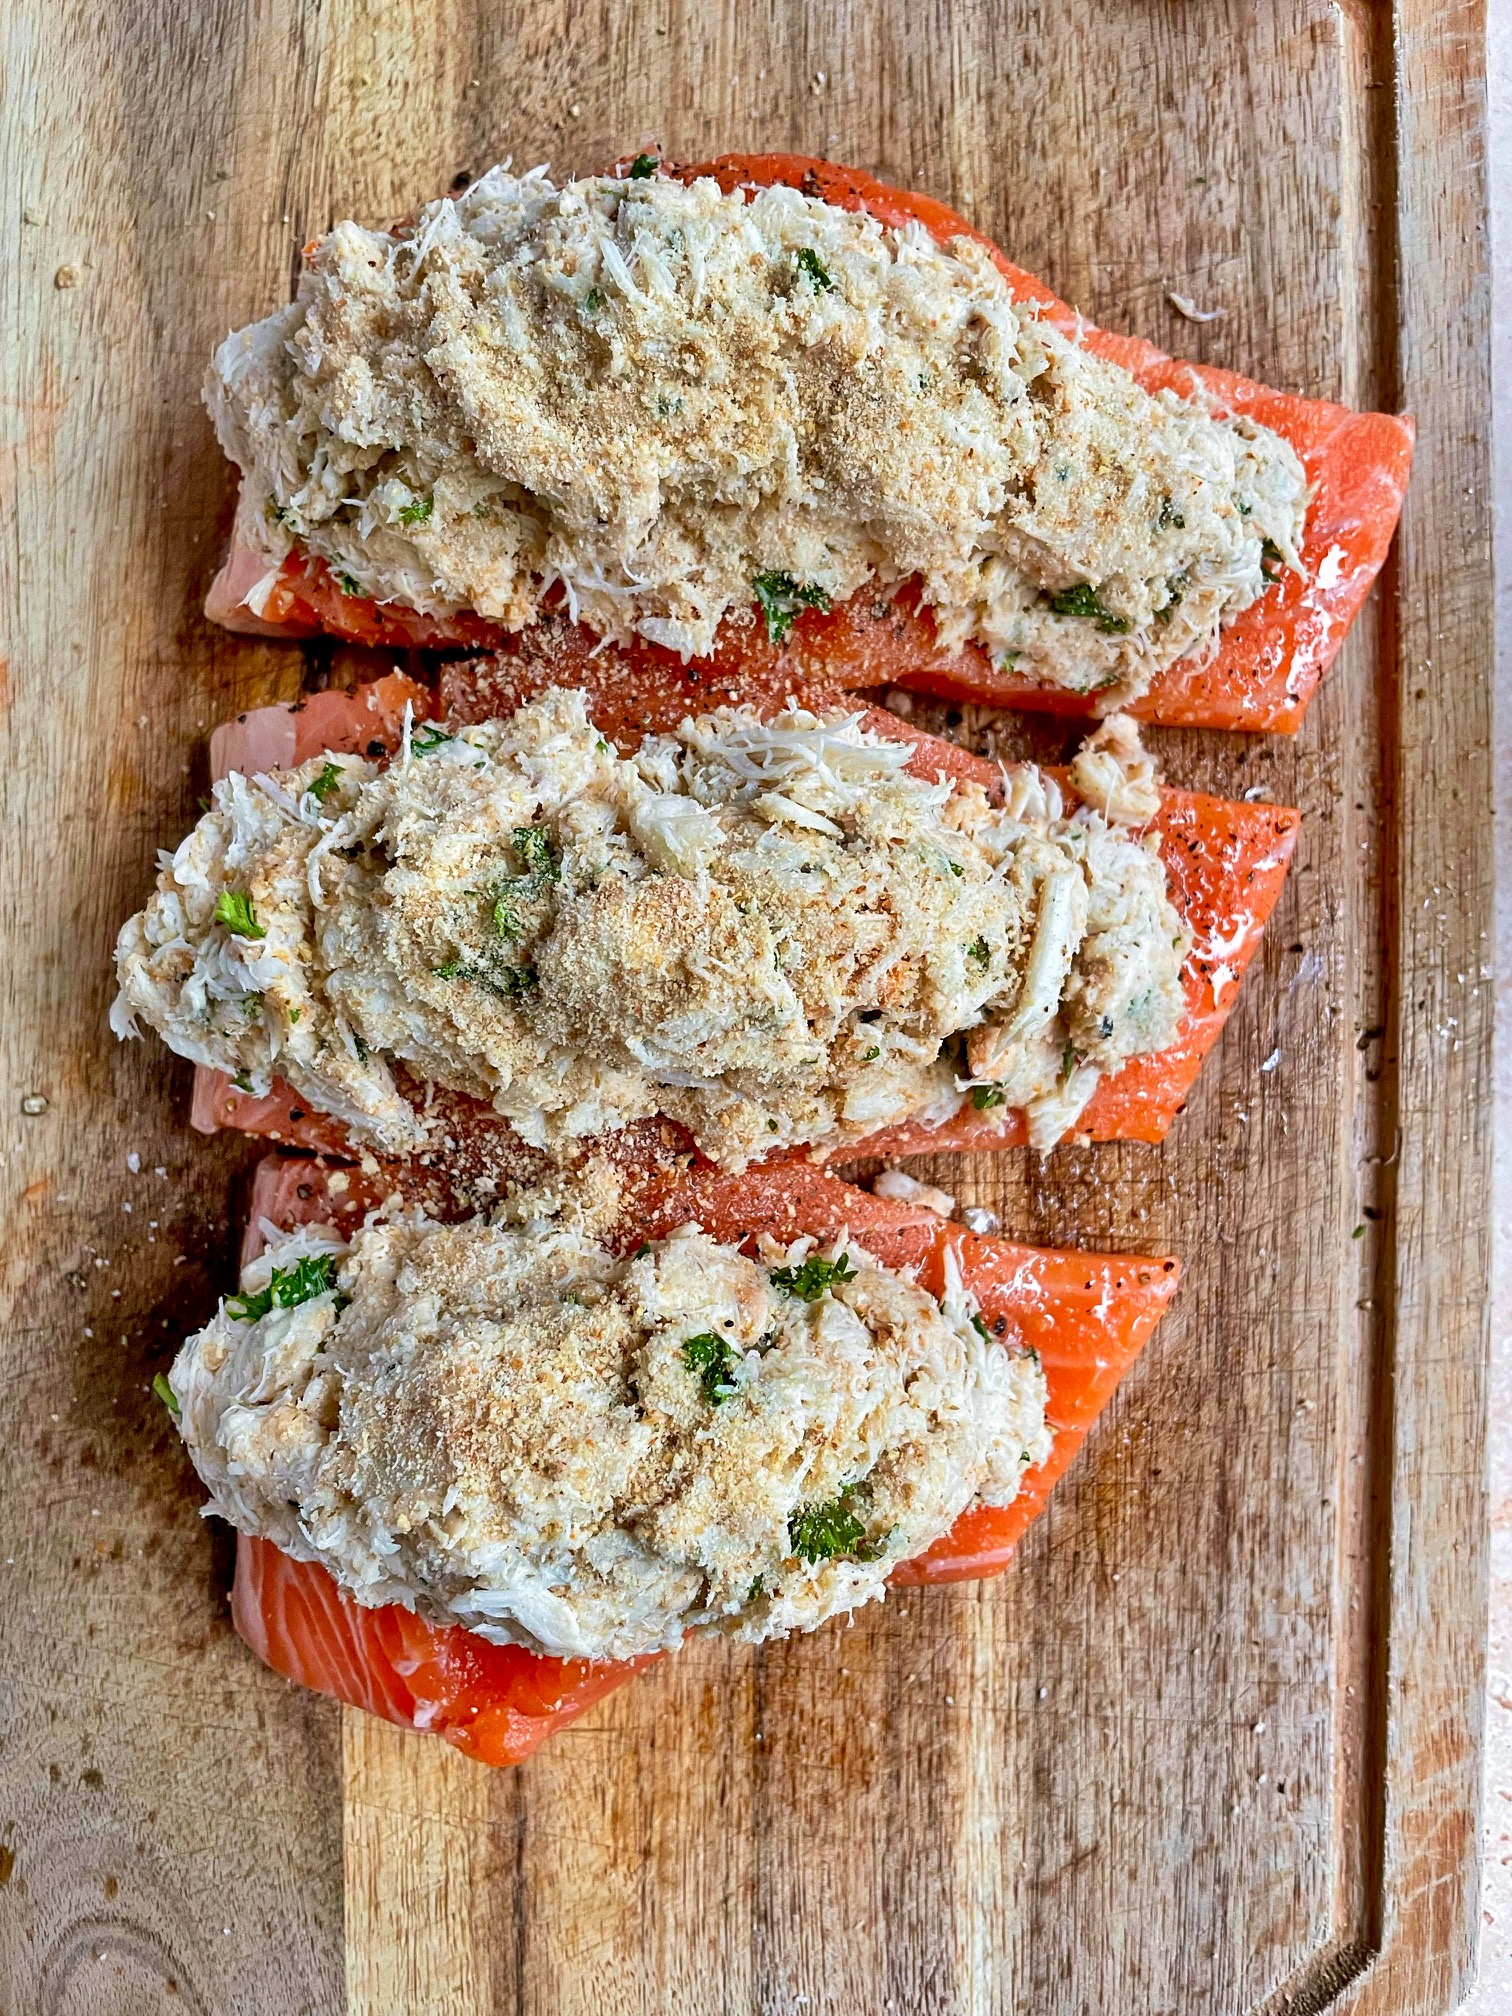 three salmon fillets stuffed with crab filling on a cutting board before air frying.